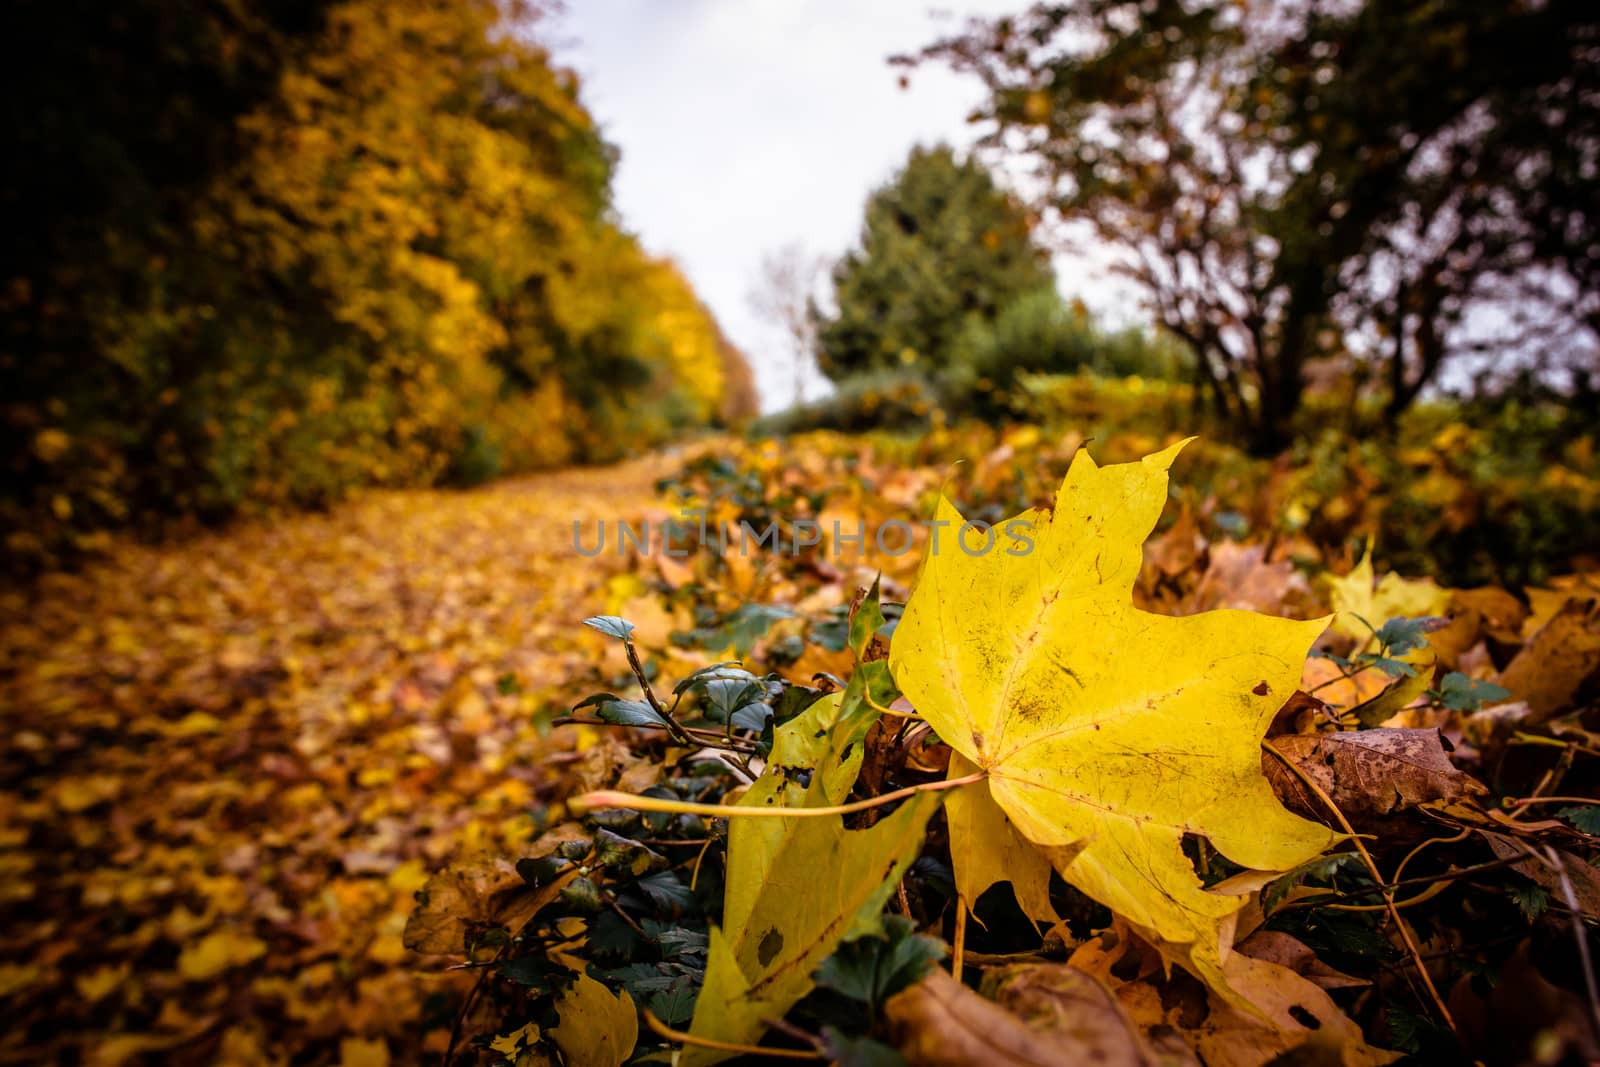 Fallen leaf in nature at autumn time